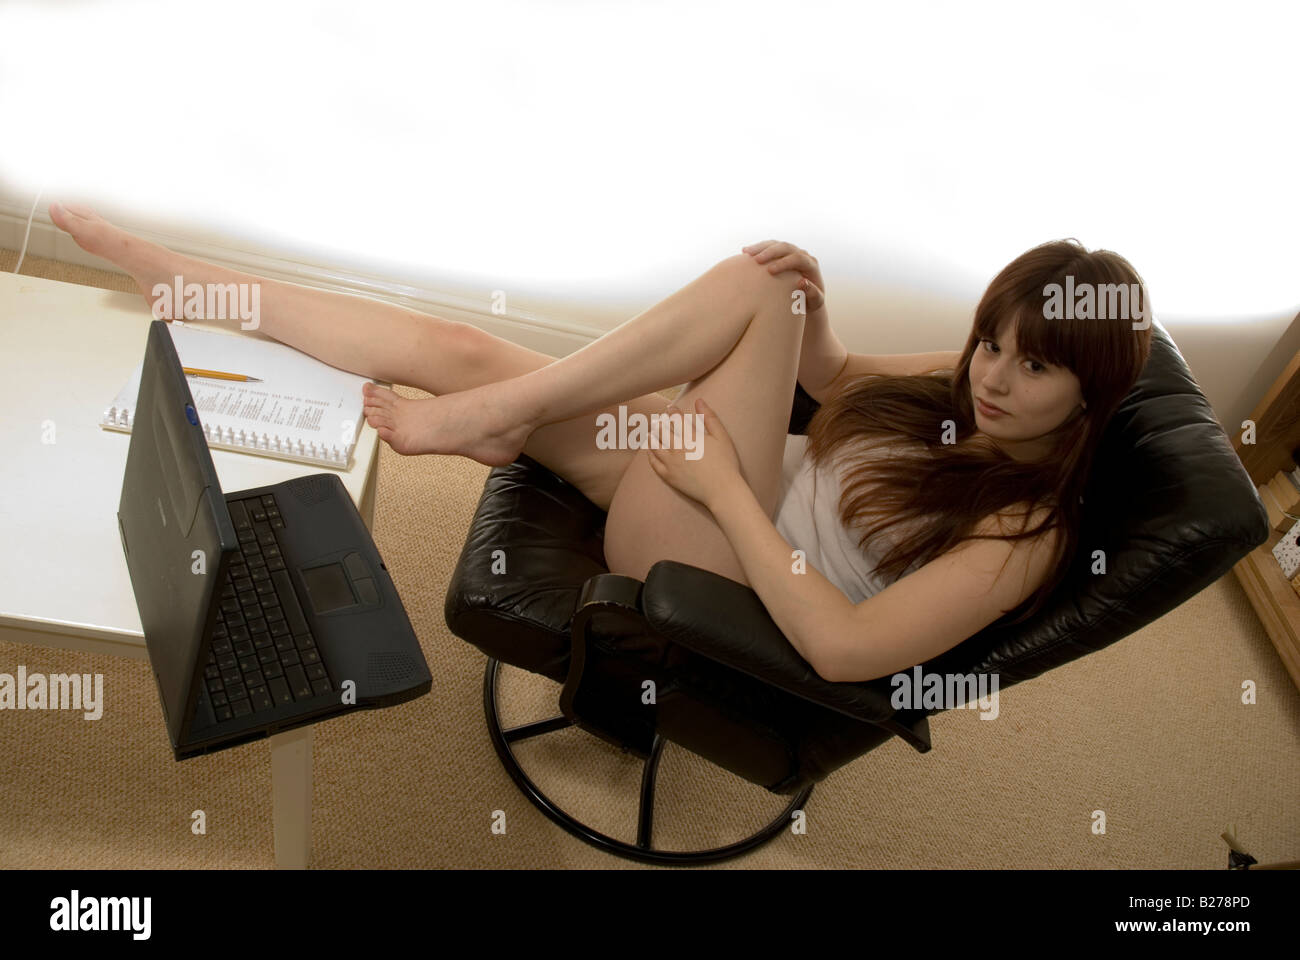 Home office girl working in underwear Stock Photo - Alamy